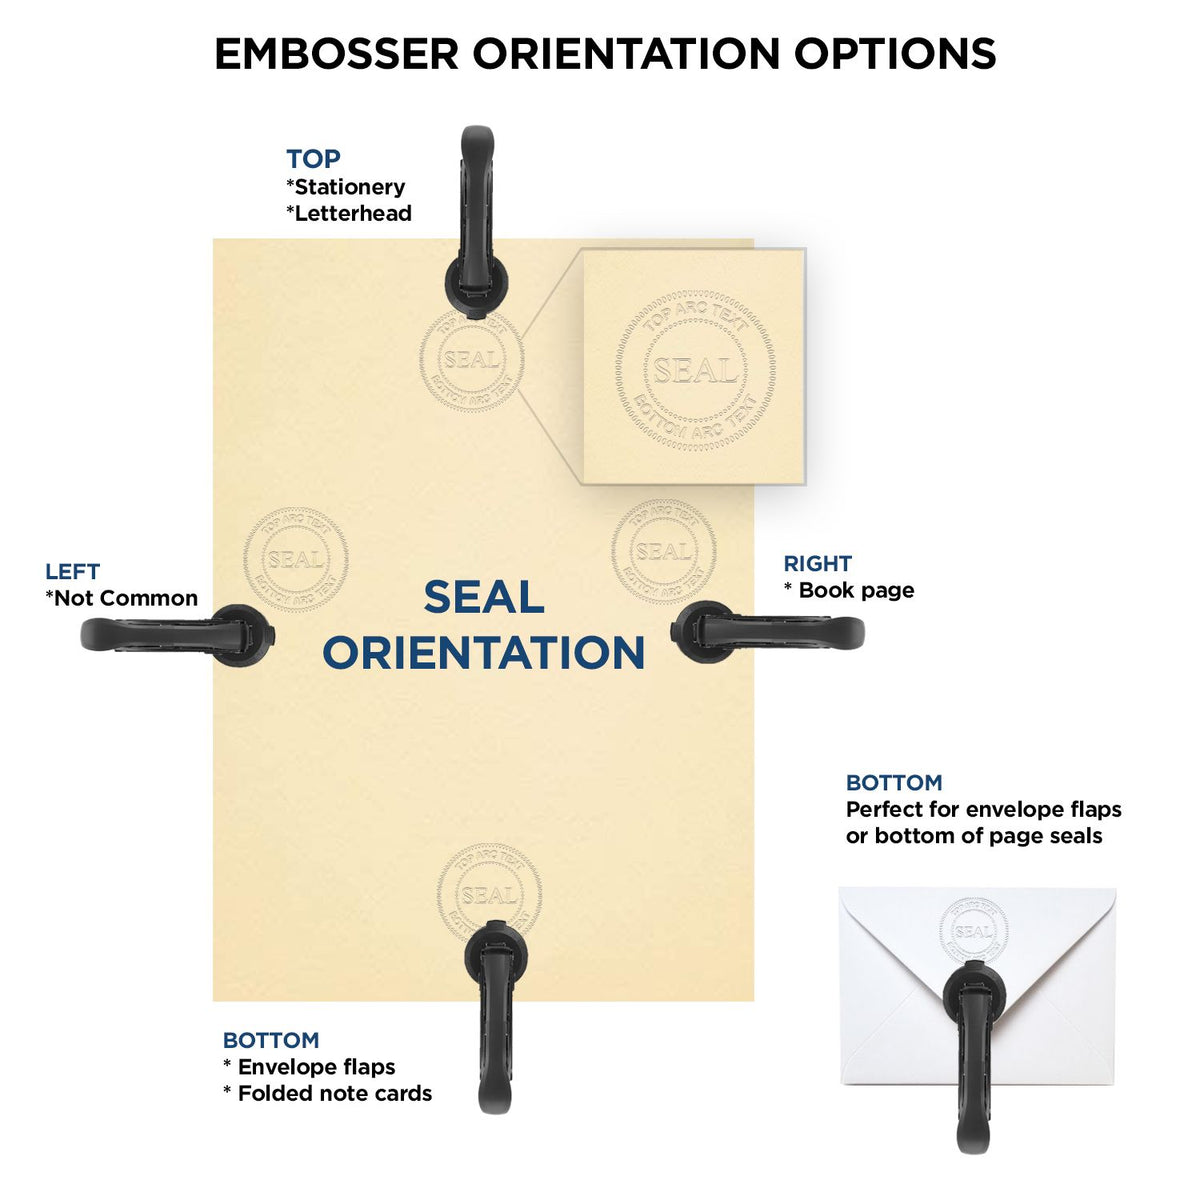 An infographic for the Soft Pocket Pennsylvania Landscape Architect Embosser showing embosser orientation, this is showing examples of a top, bottom, right and left insert.